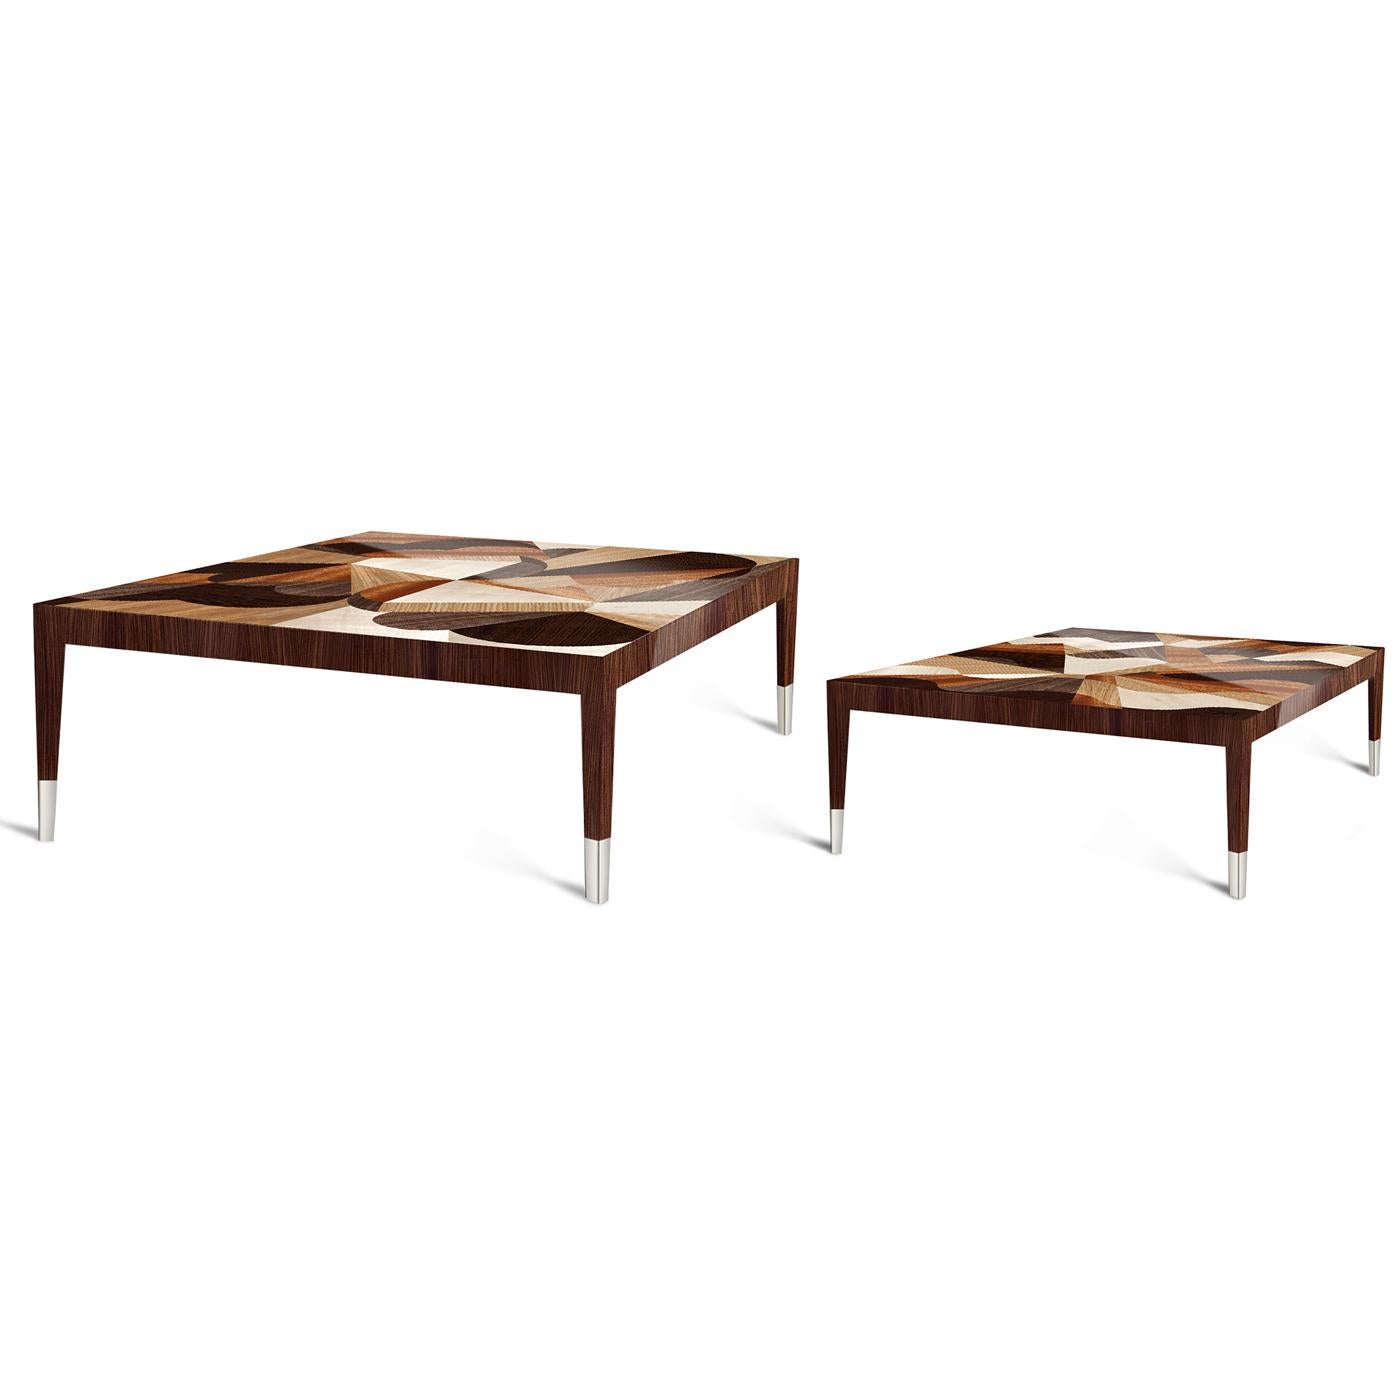 Part of the Classica collection, this coffee table is characterized by a top with an abstract, three-dimensional design made of wood inlays inspired by the personal, inner conflict between happy thoughts and gloomy doubts in a relationship. The